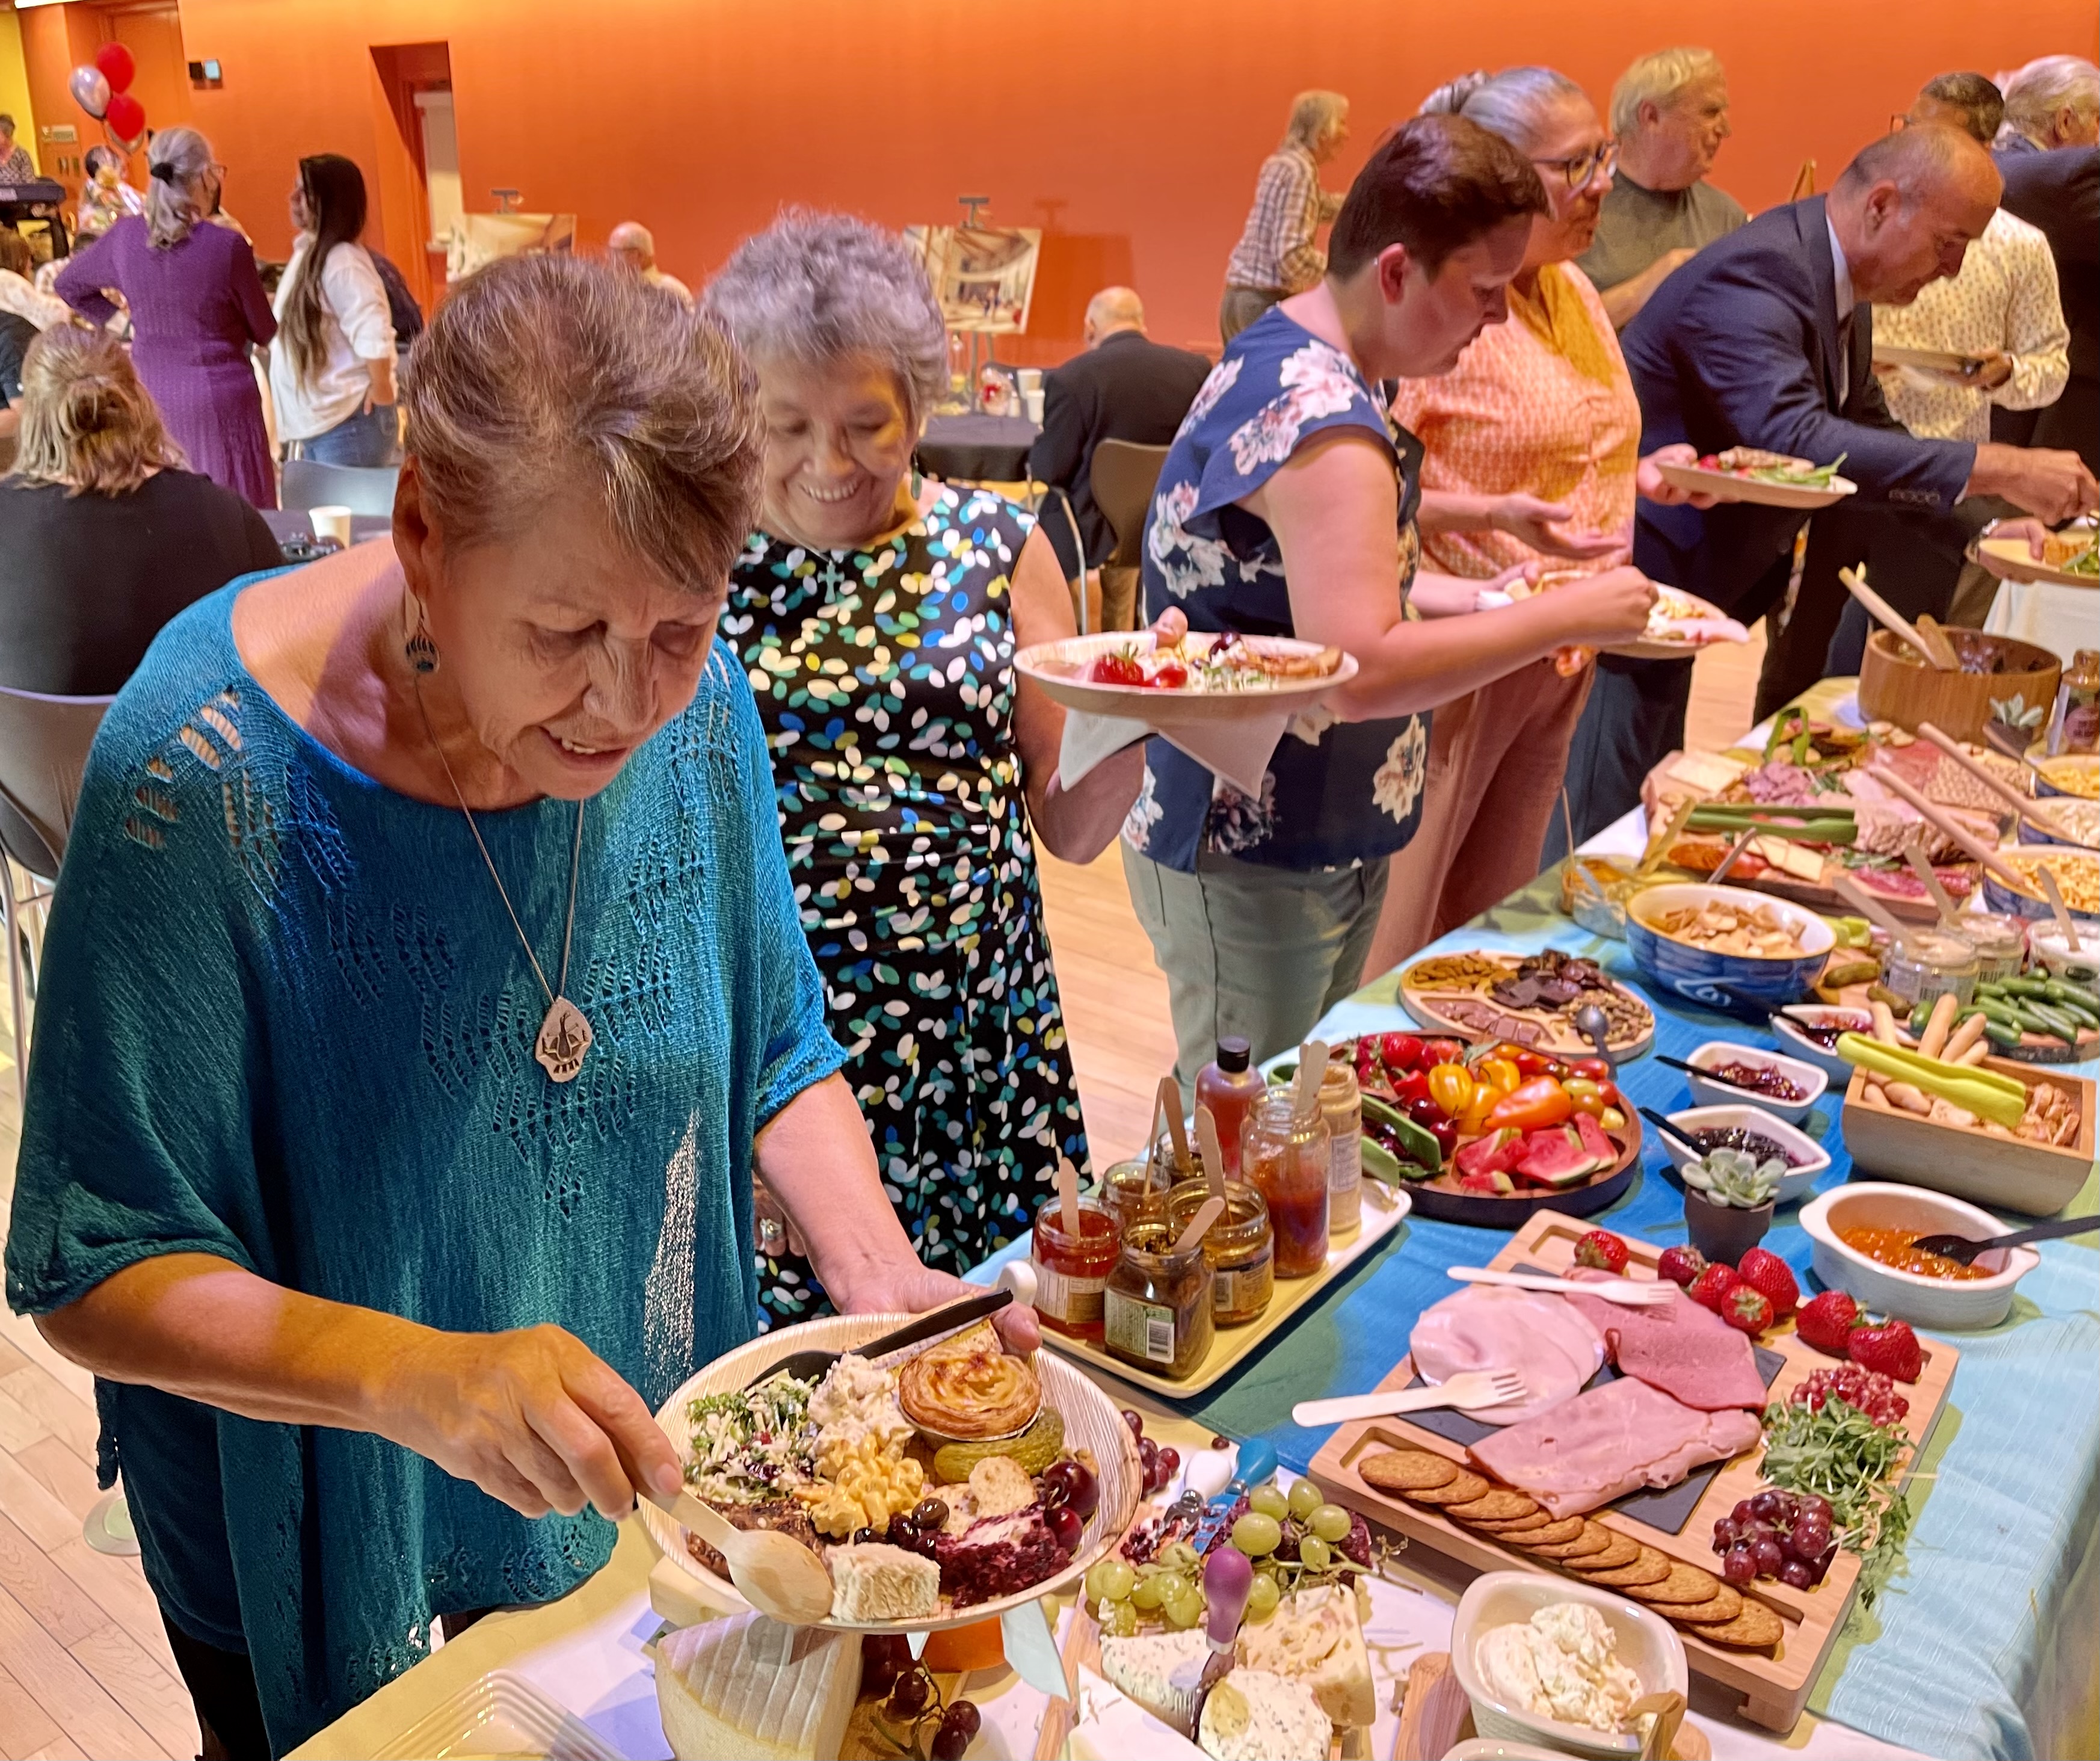 many smiling people filling their plates at a delicious-looking buffet